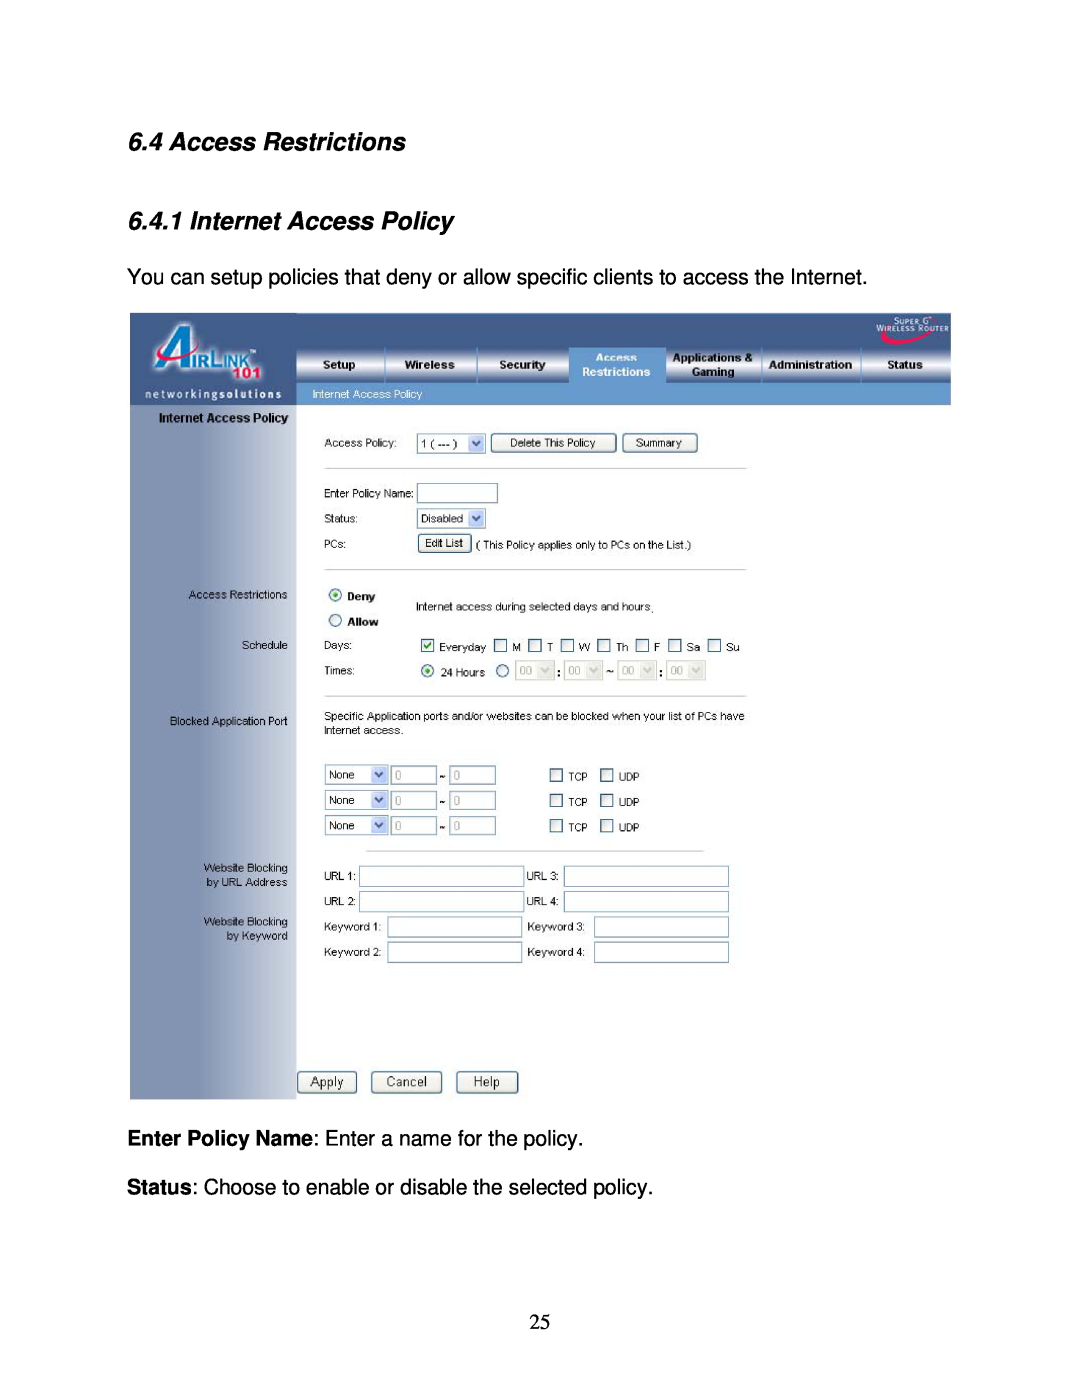 Airlink101 AR420W Access Restrictions 6.4.1 Internet Access Policy, Enter Policy Name Enter a name for the policy 